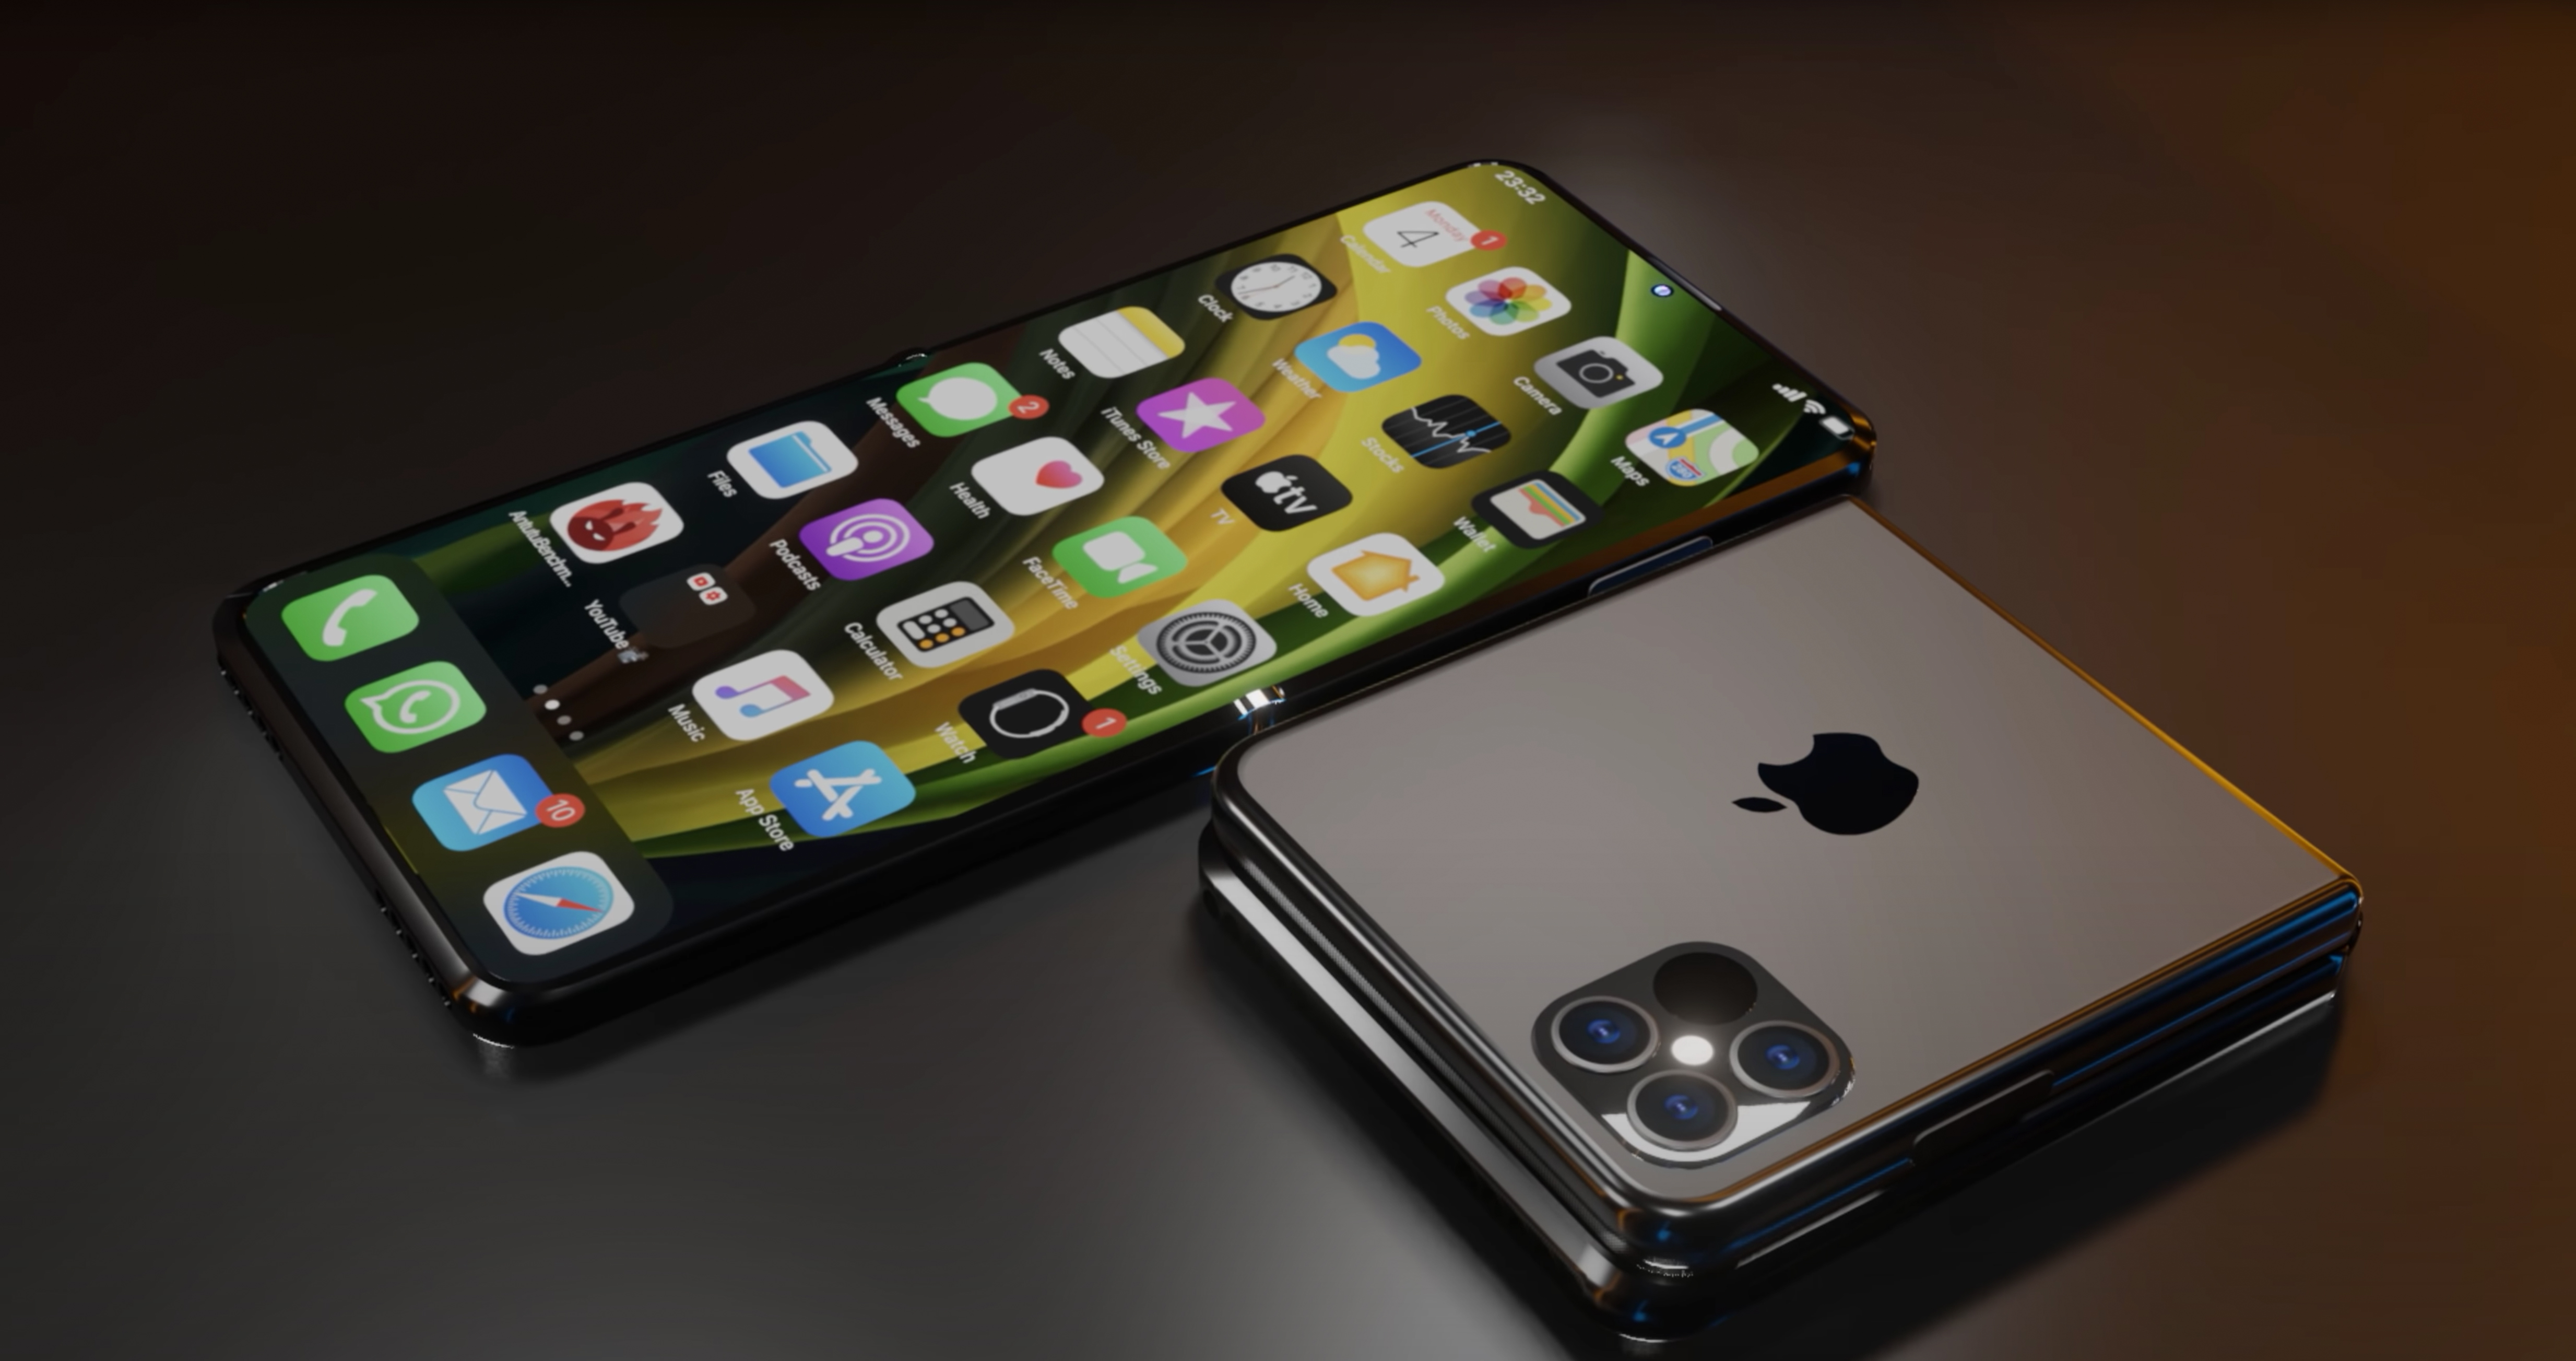 iPhone Flip: Everything we know about Apple’s foldable phone plans